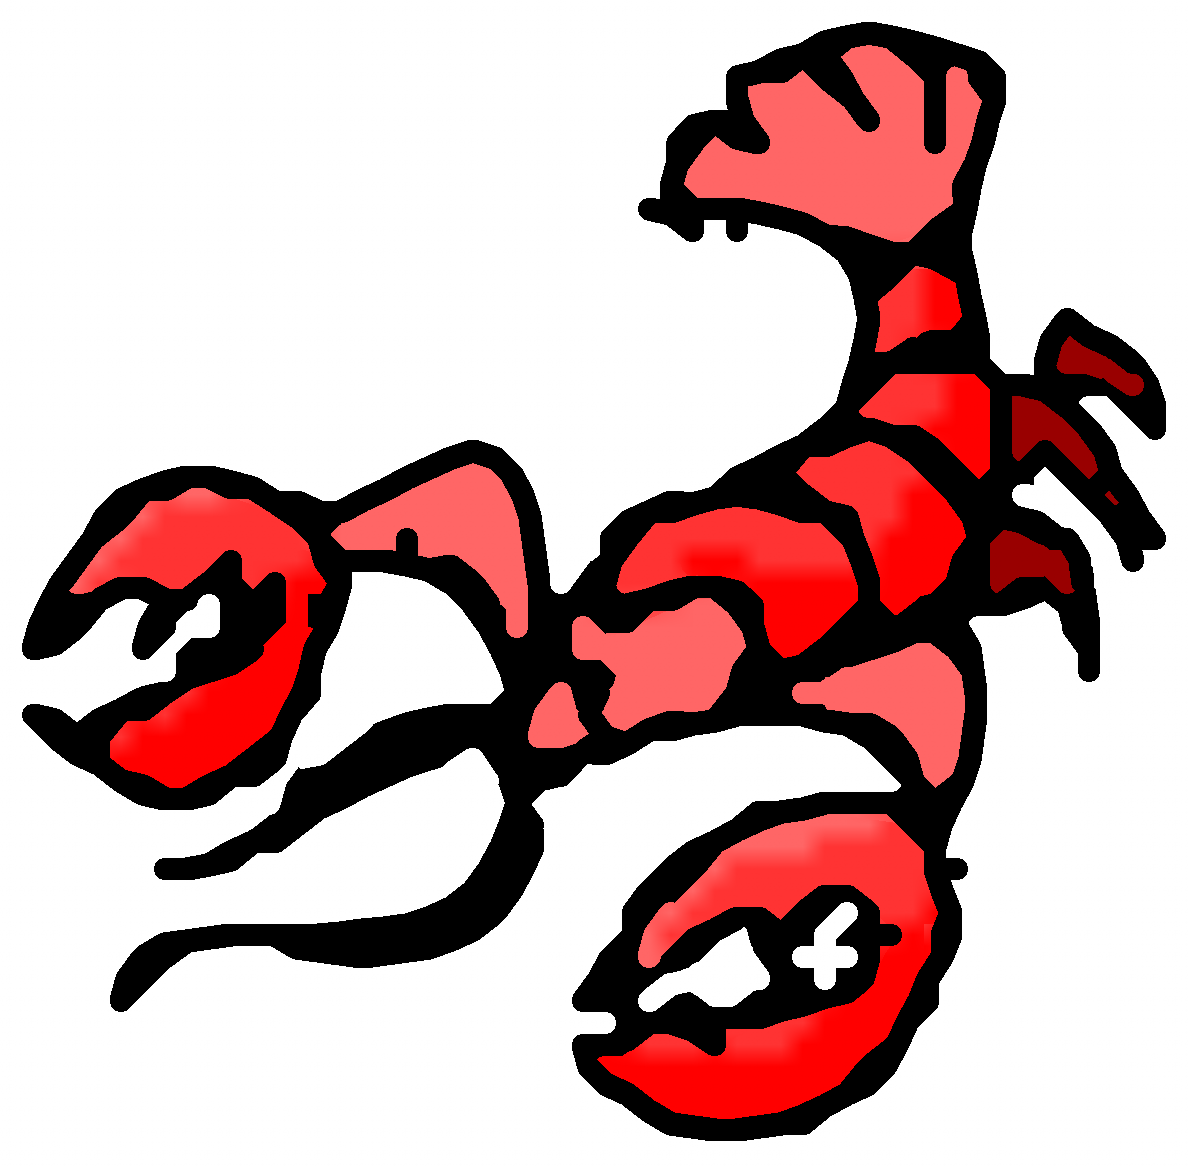 pixelated world, Lobster. | Clipart Panda - Free Clipart Images